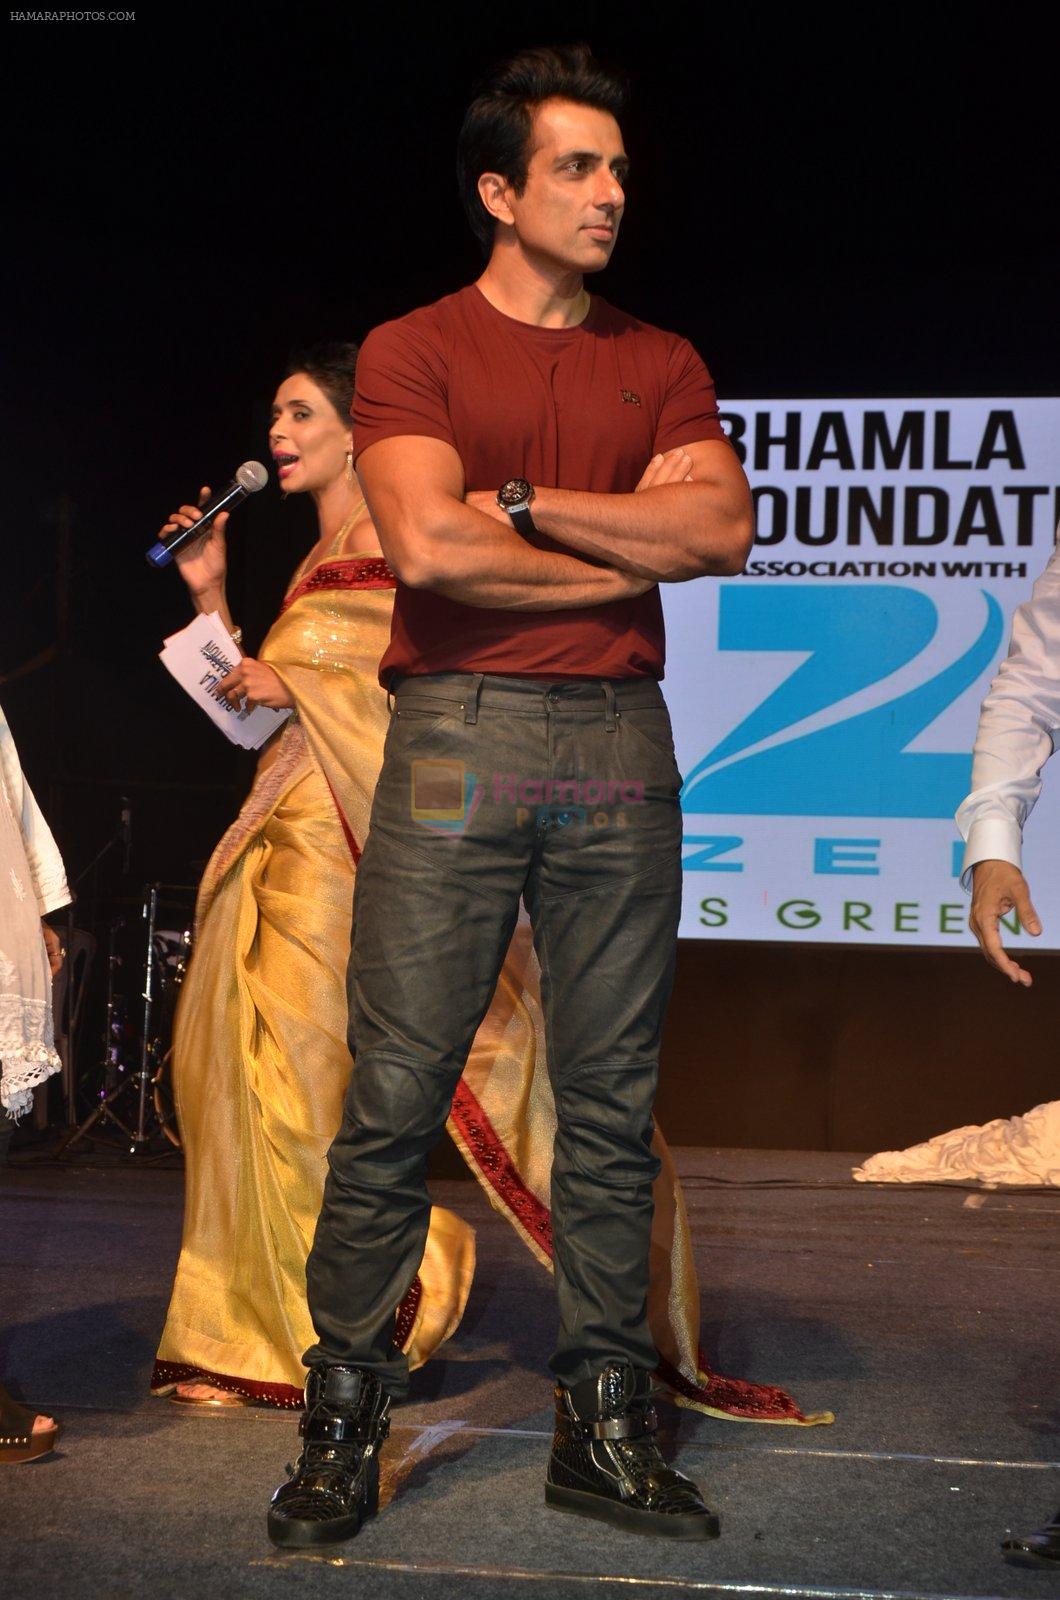 Sonu Sood at Asif Bhamla foundation event on world environment day in Mumbai on 5th June 2016